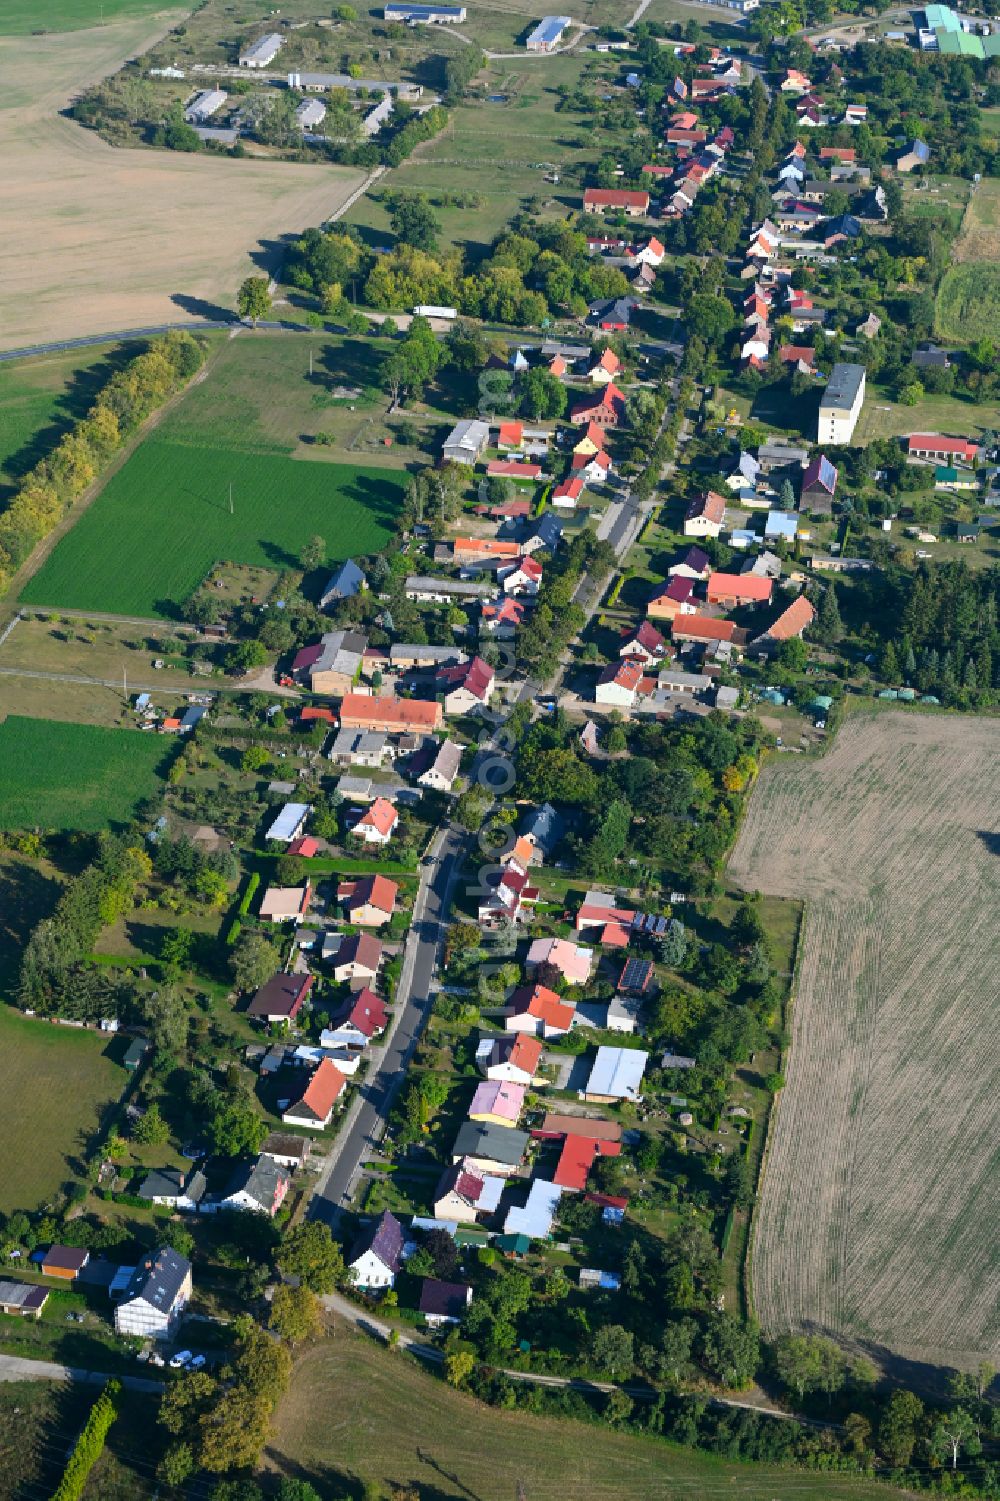 Klosterwalde from above - Village - view on the edge of forested areas in Klosterwalde in the state Brandenburg, Germany